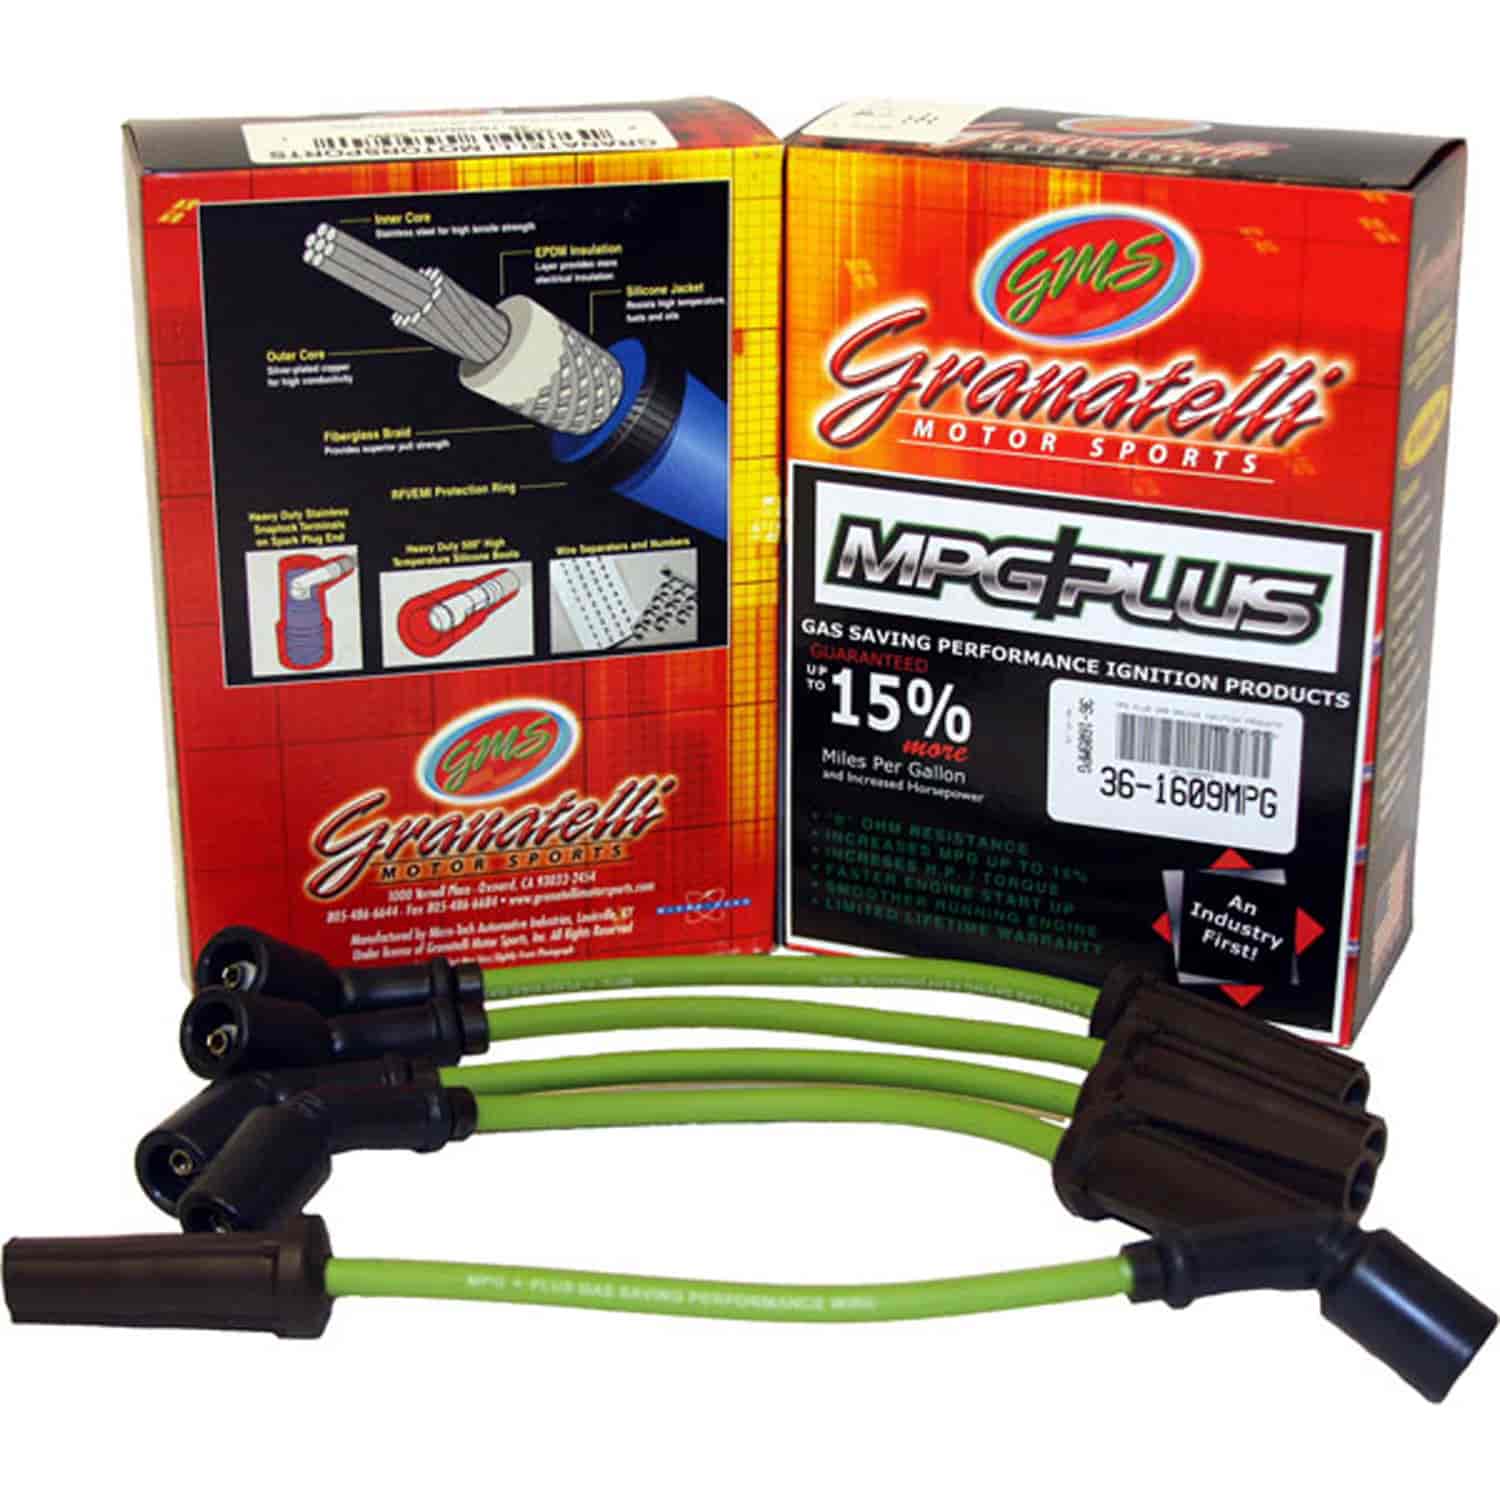 MPG Wires HONDA PRELUDE 4CYL 2.0L 88-91